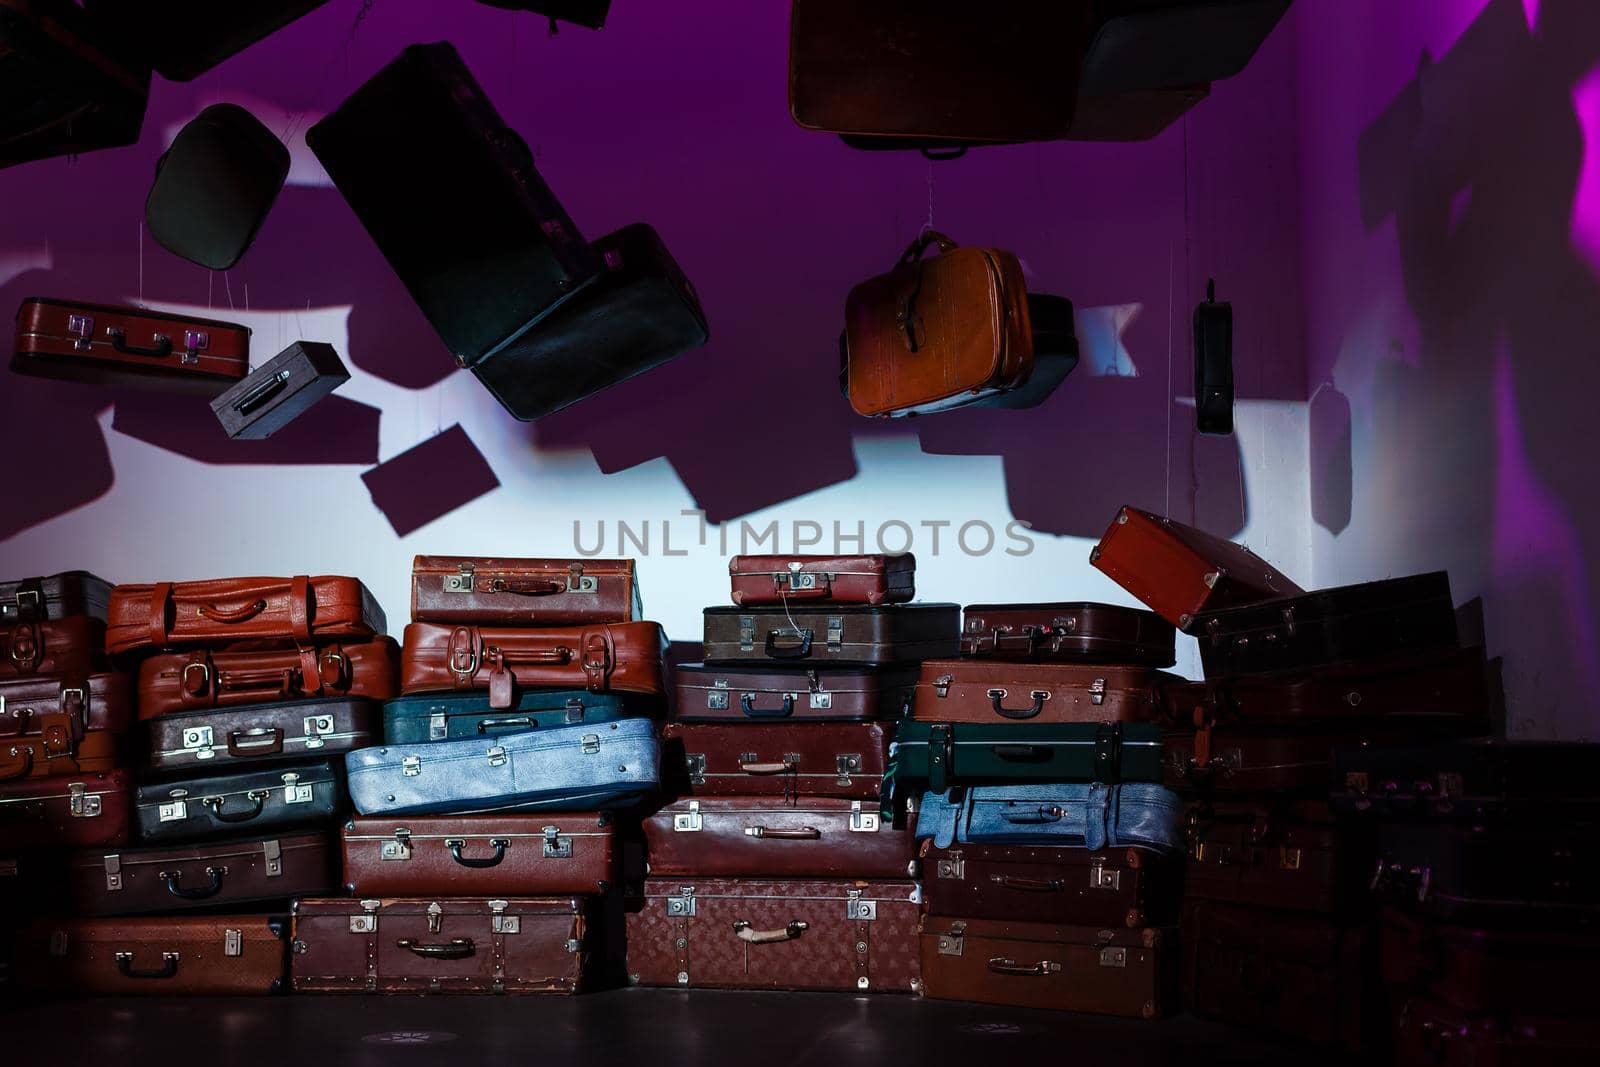 A lot of Old vintage suitcases by Andelov13